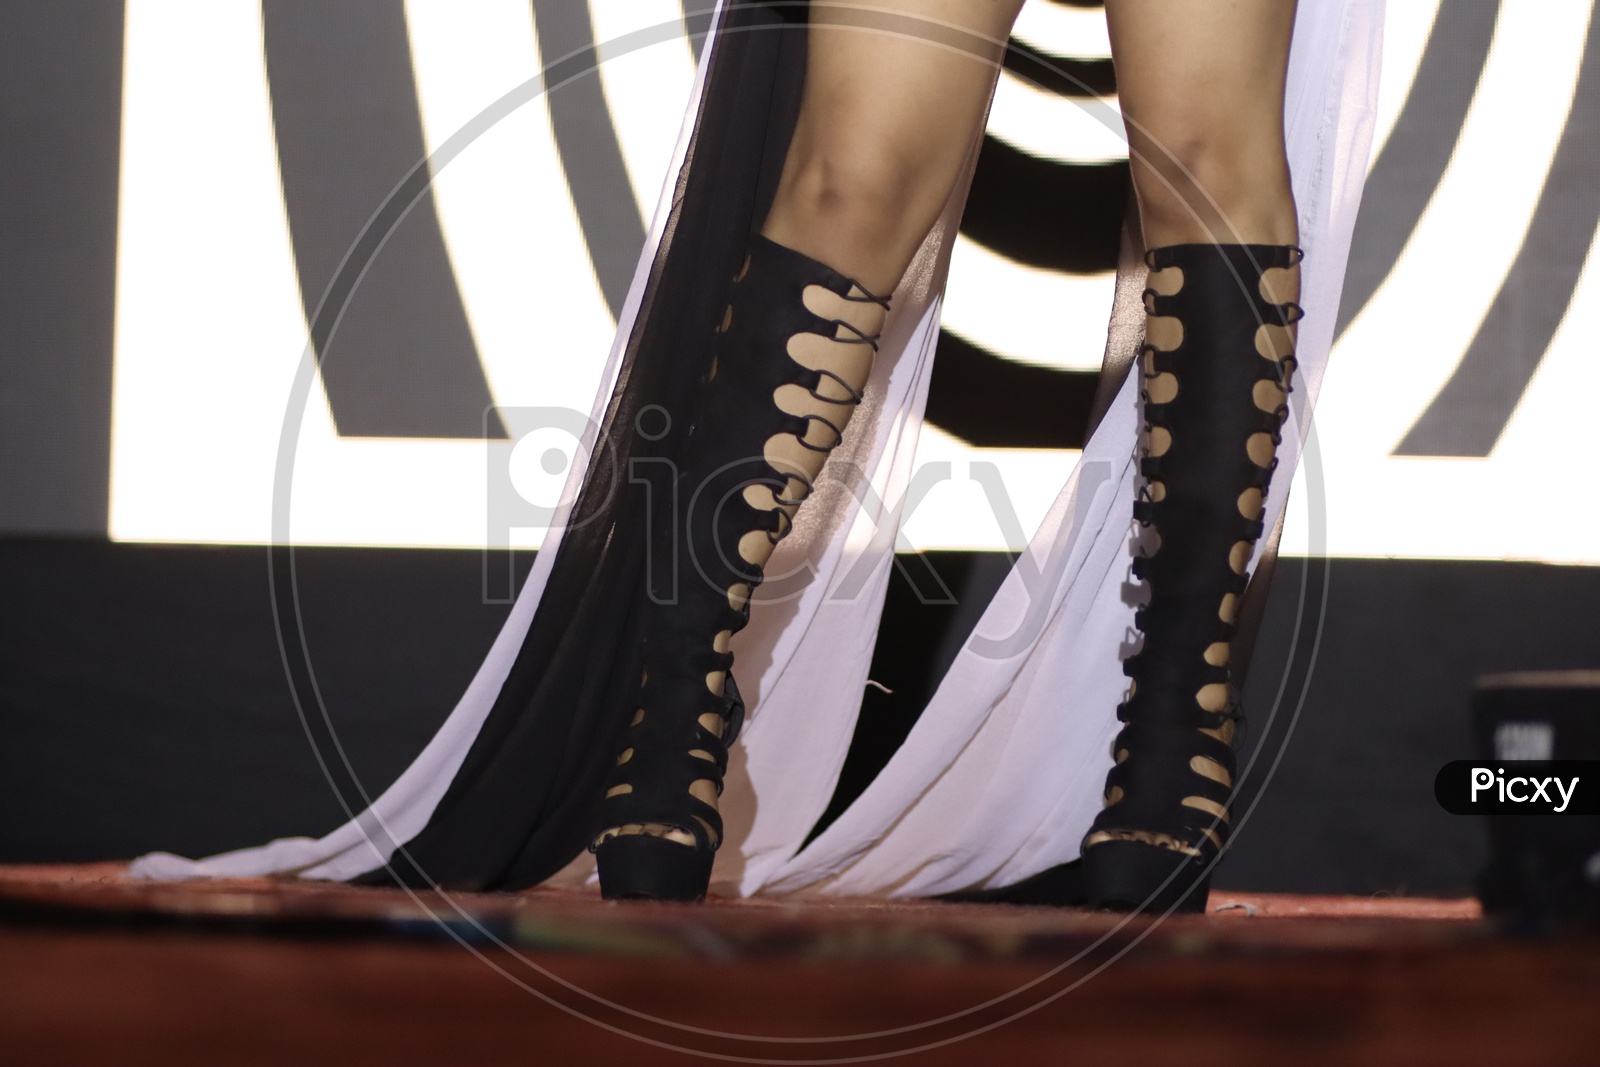 feet of a dancer on stage doing hip hop dancing stance with background neon lights